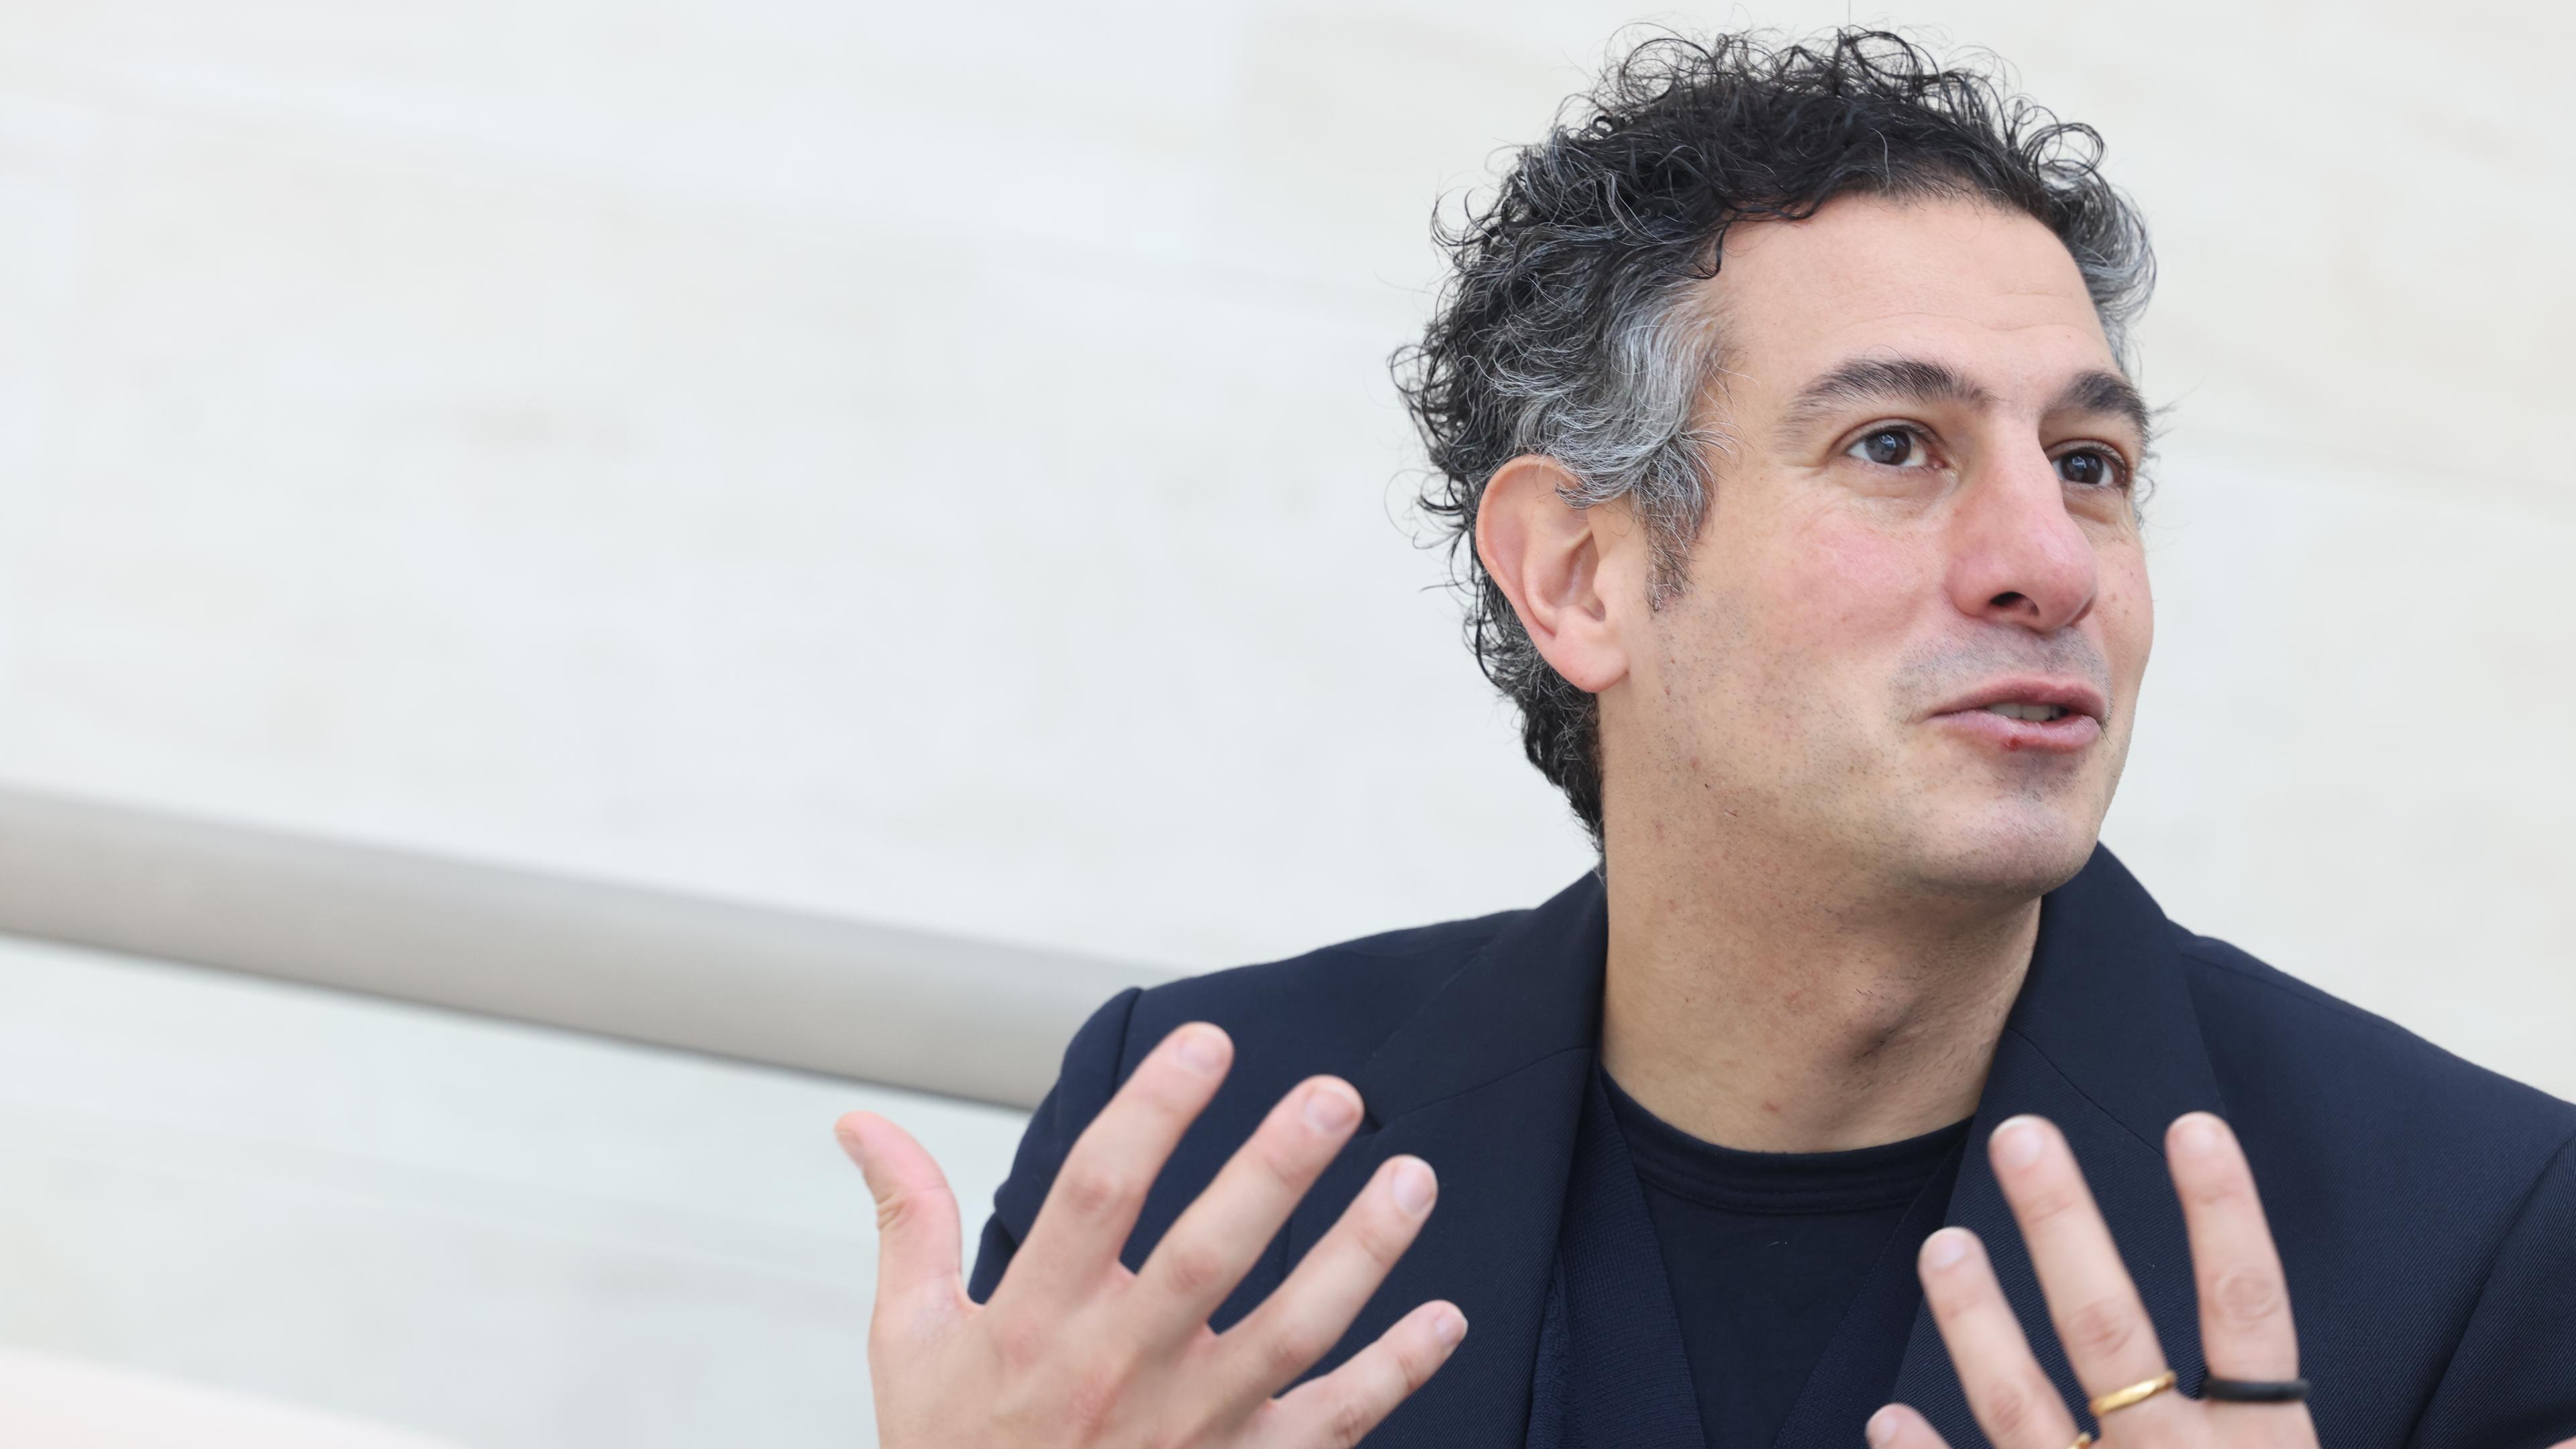 Artist Rayyane Tabet thanked Mudam for providing a space for his exhibition